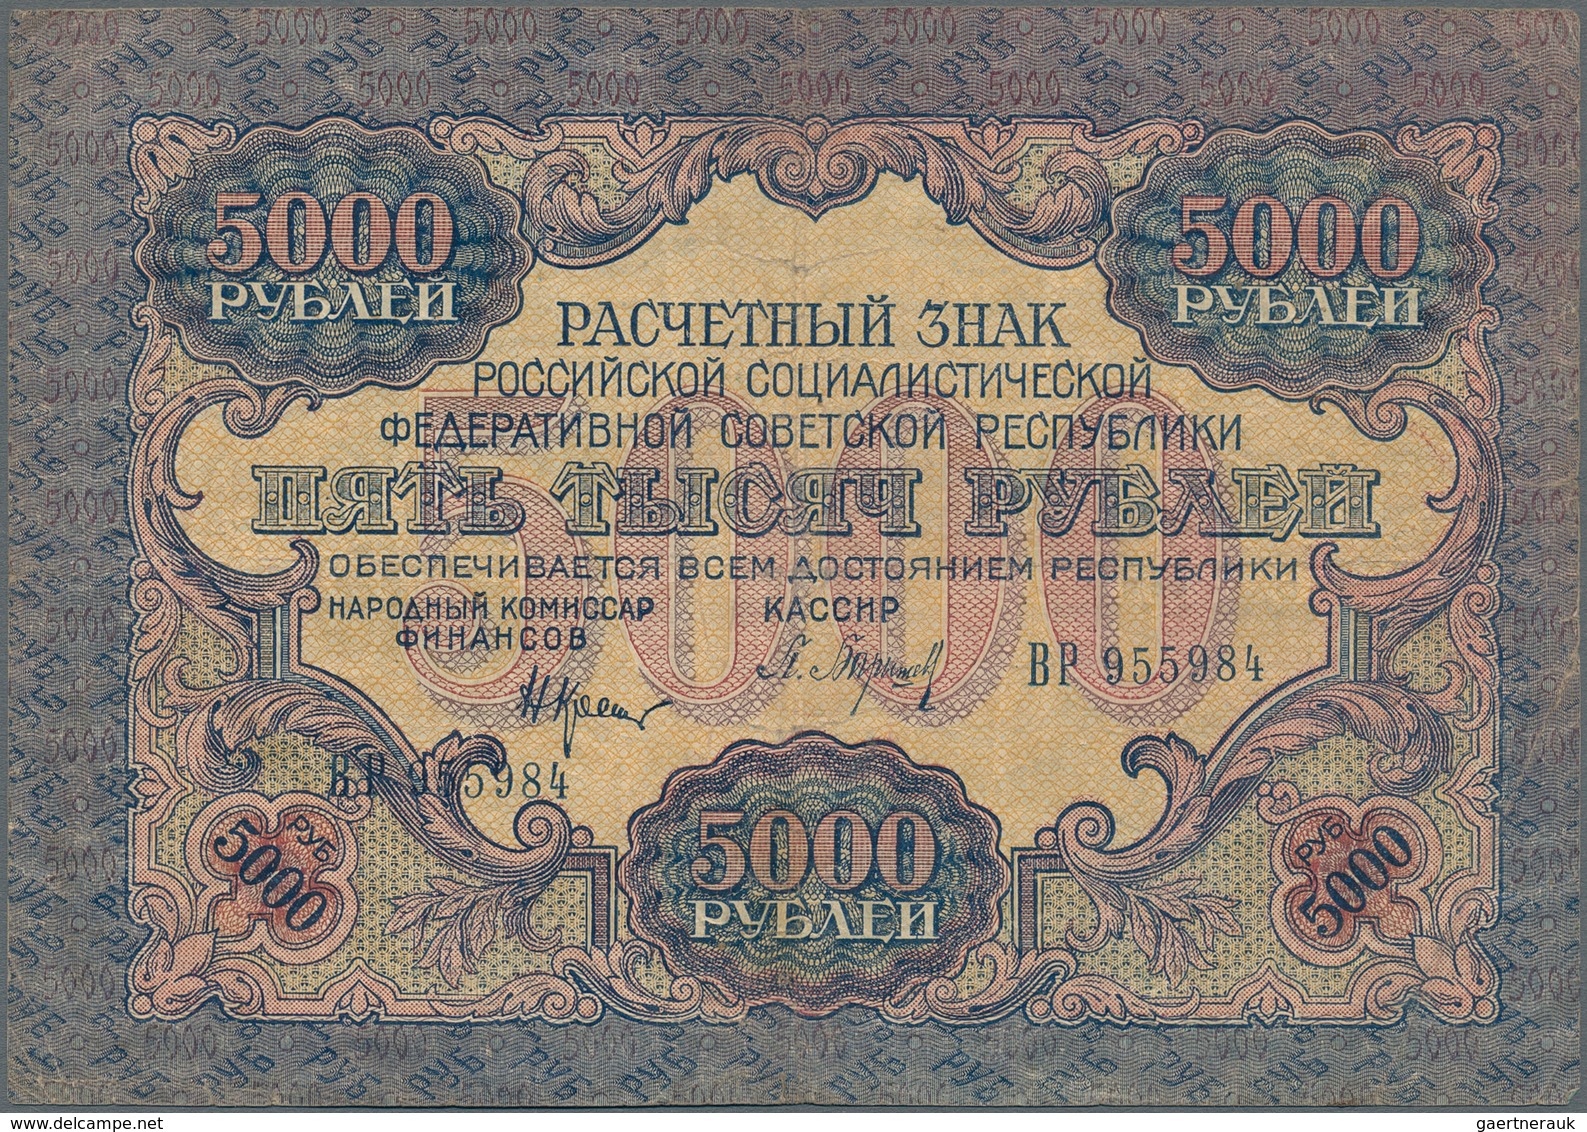 Alle Welt: Collectors album with about 340 banknotes, mainly Russia and former Soviet States, but al